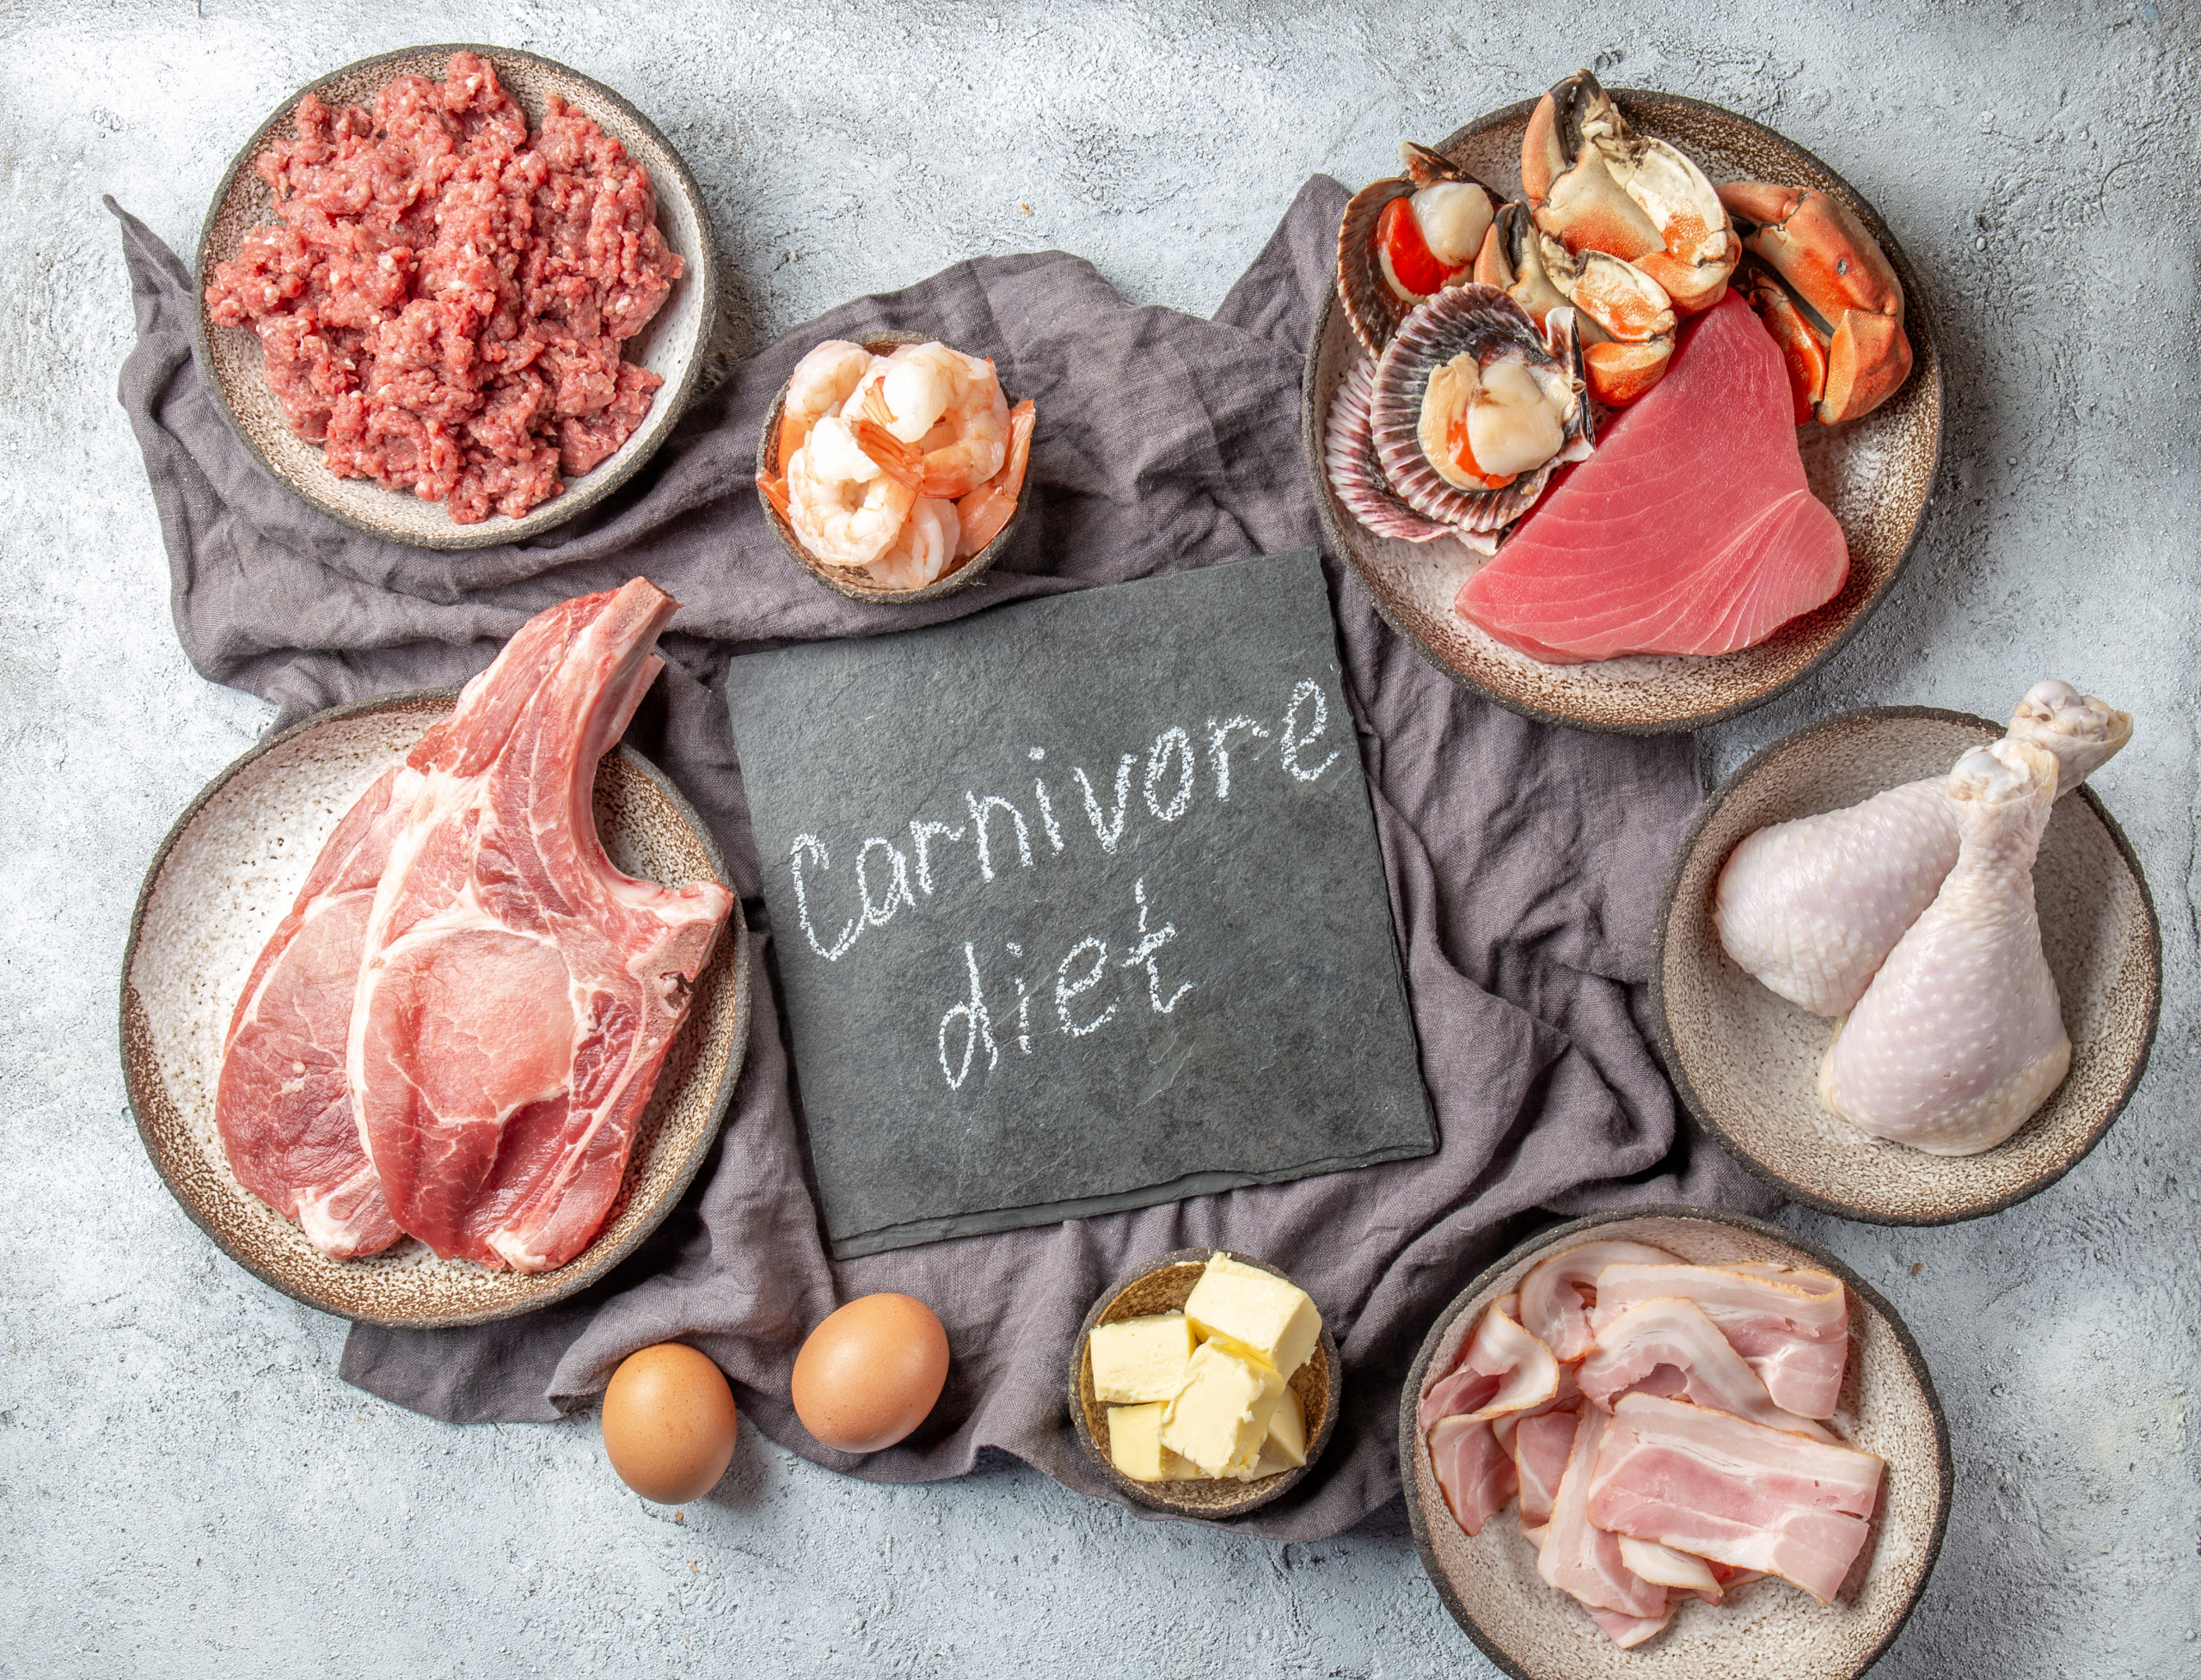 Carnivore Diet Food List: What to Eat On the Carnivore Diet - Dr